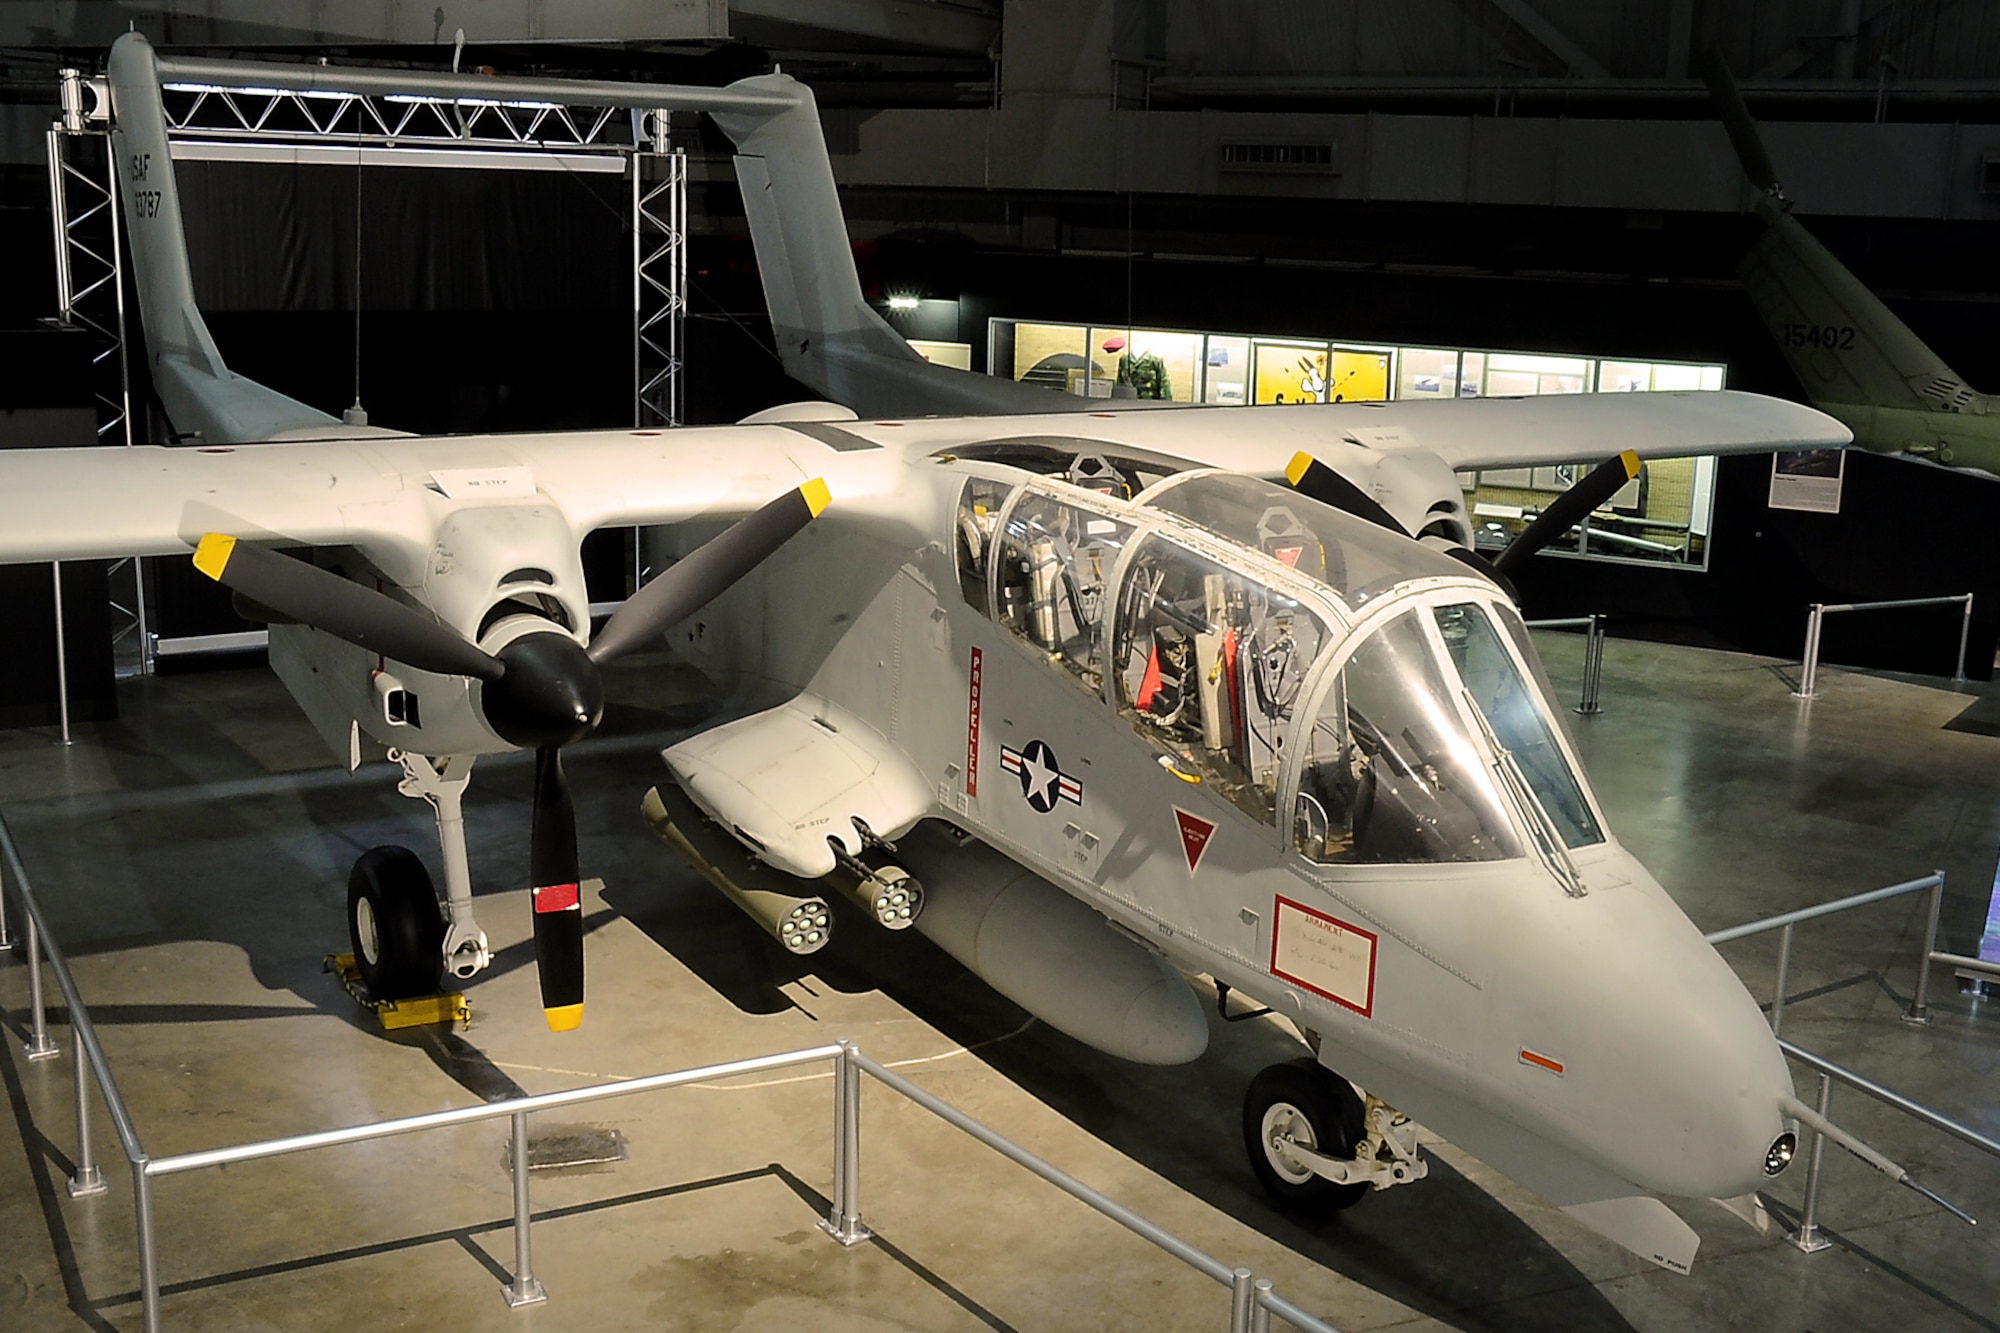 DAYTON, Ohio -- North American Rockwell OV-10A in the Southeast Asia War Gallery at the National Museum of the United States Air Force. (U.S. Air Force photo) 
